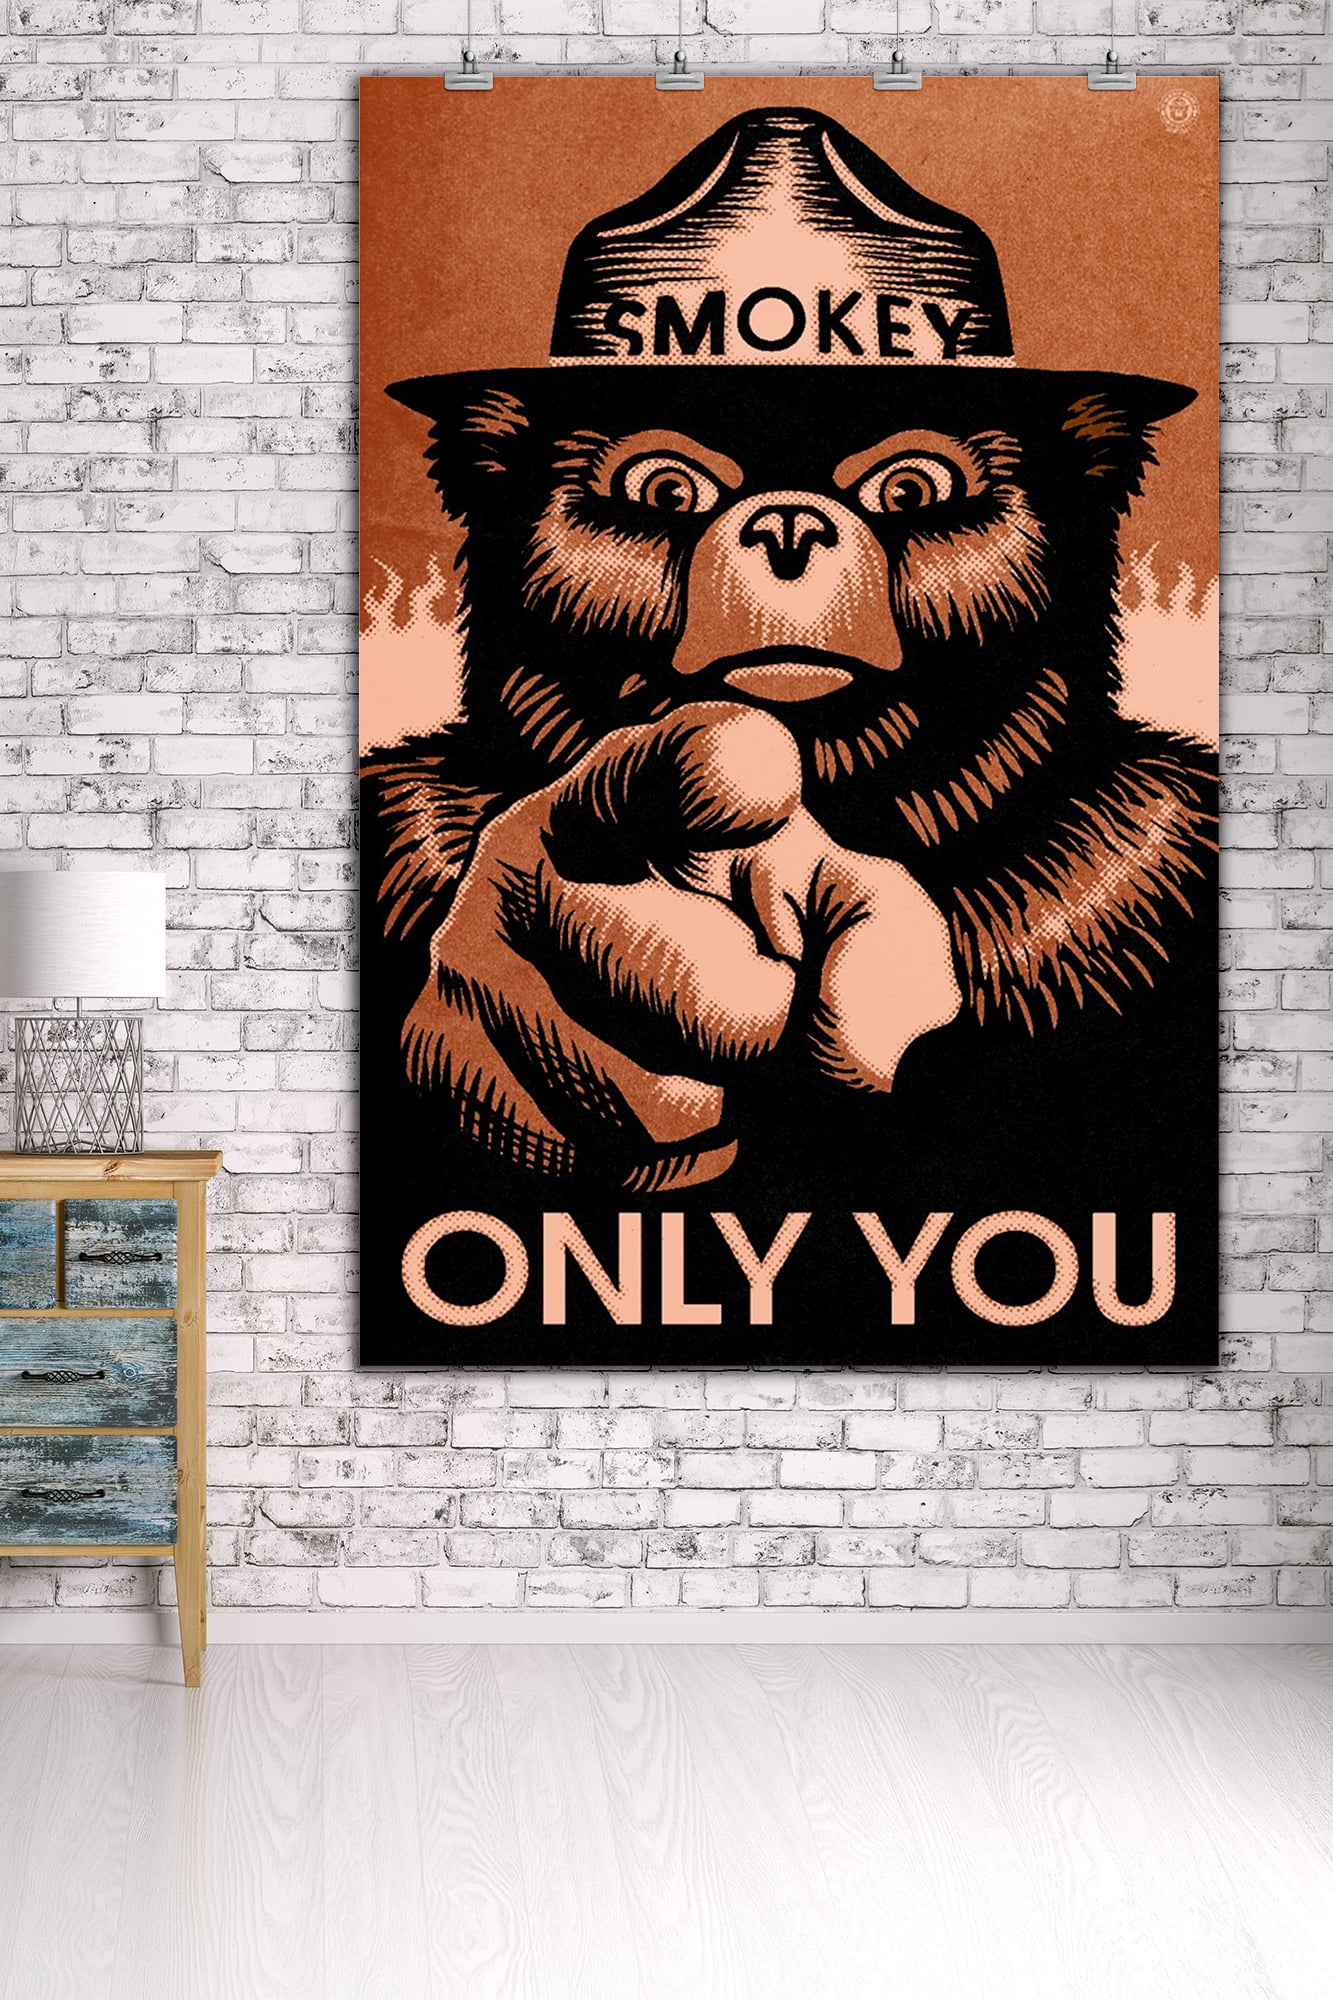 Poster, Red Decor) Smokey (12x18 Room Halftone Bear, Only You, Art Wall